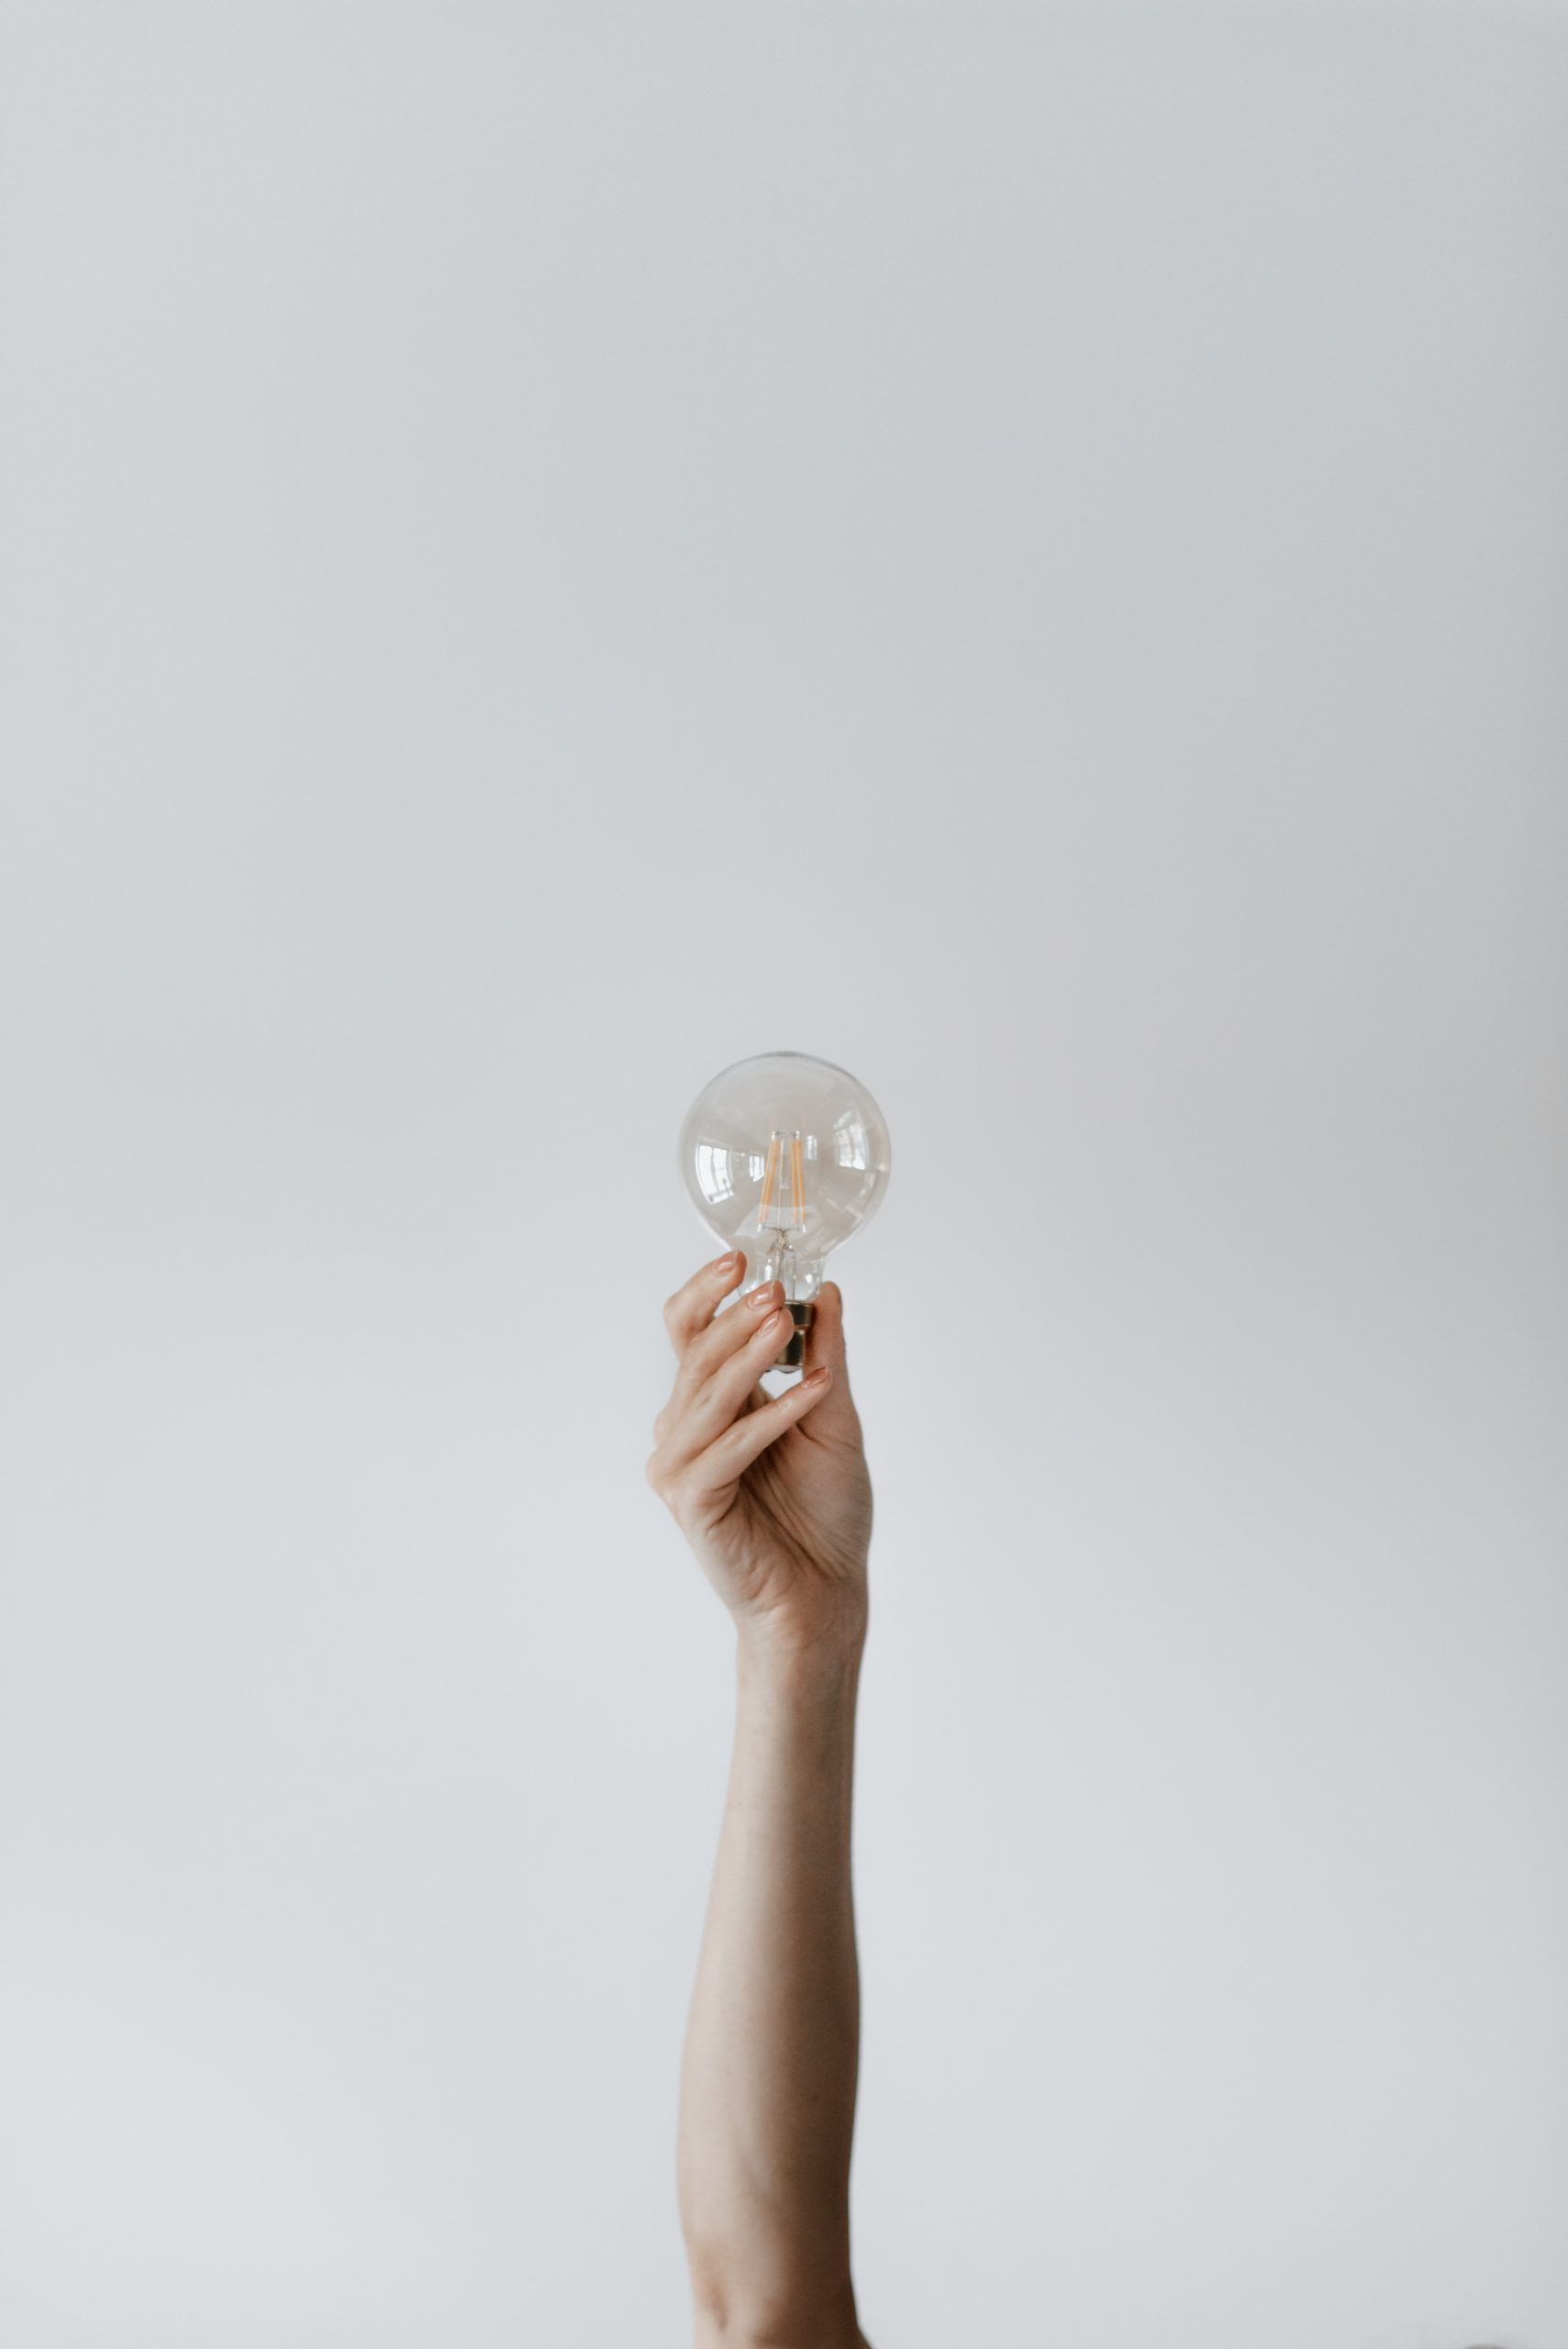 Arm reaching from the bottom of the image extends straight and holds the base of a lightbulb mid-image